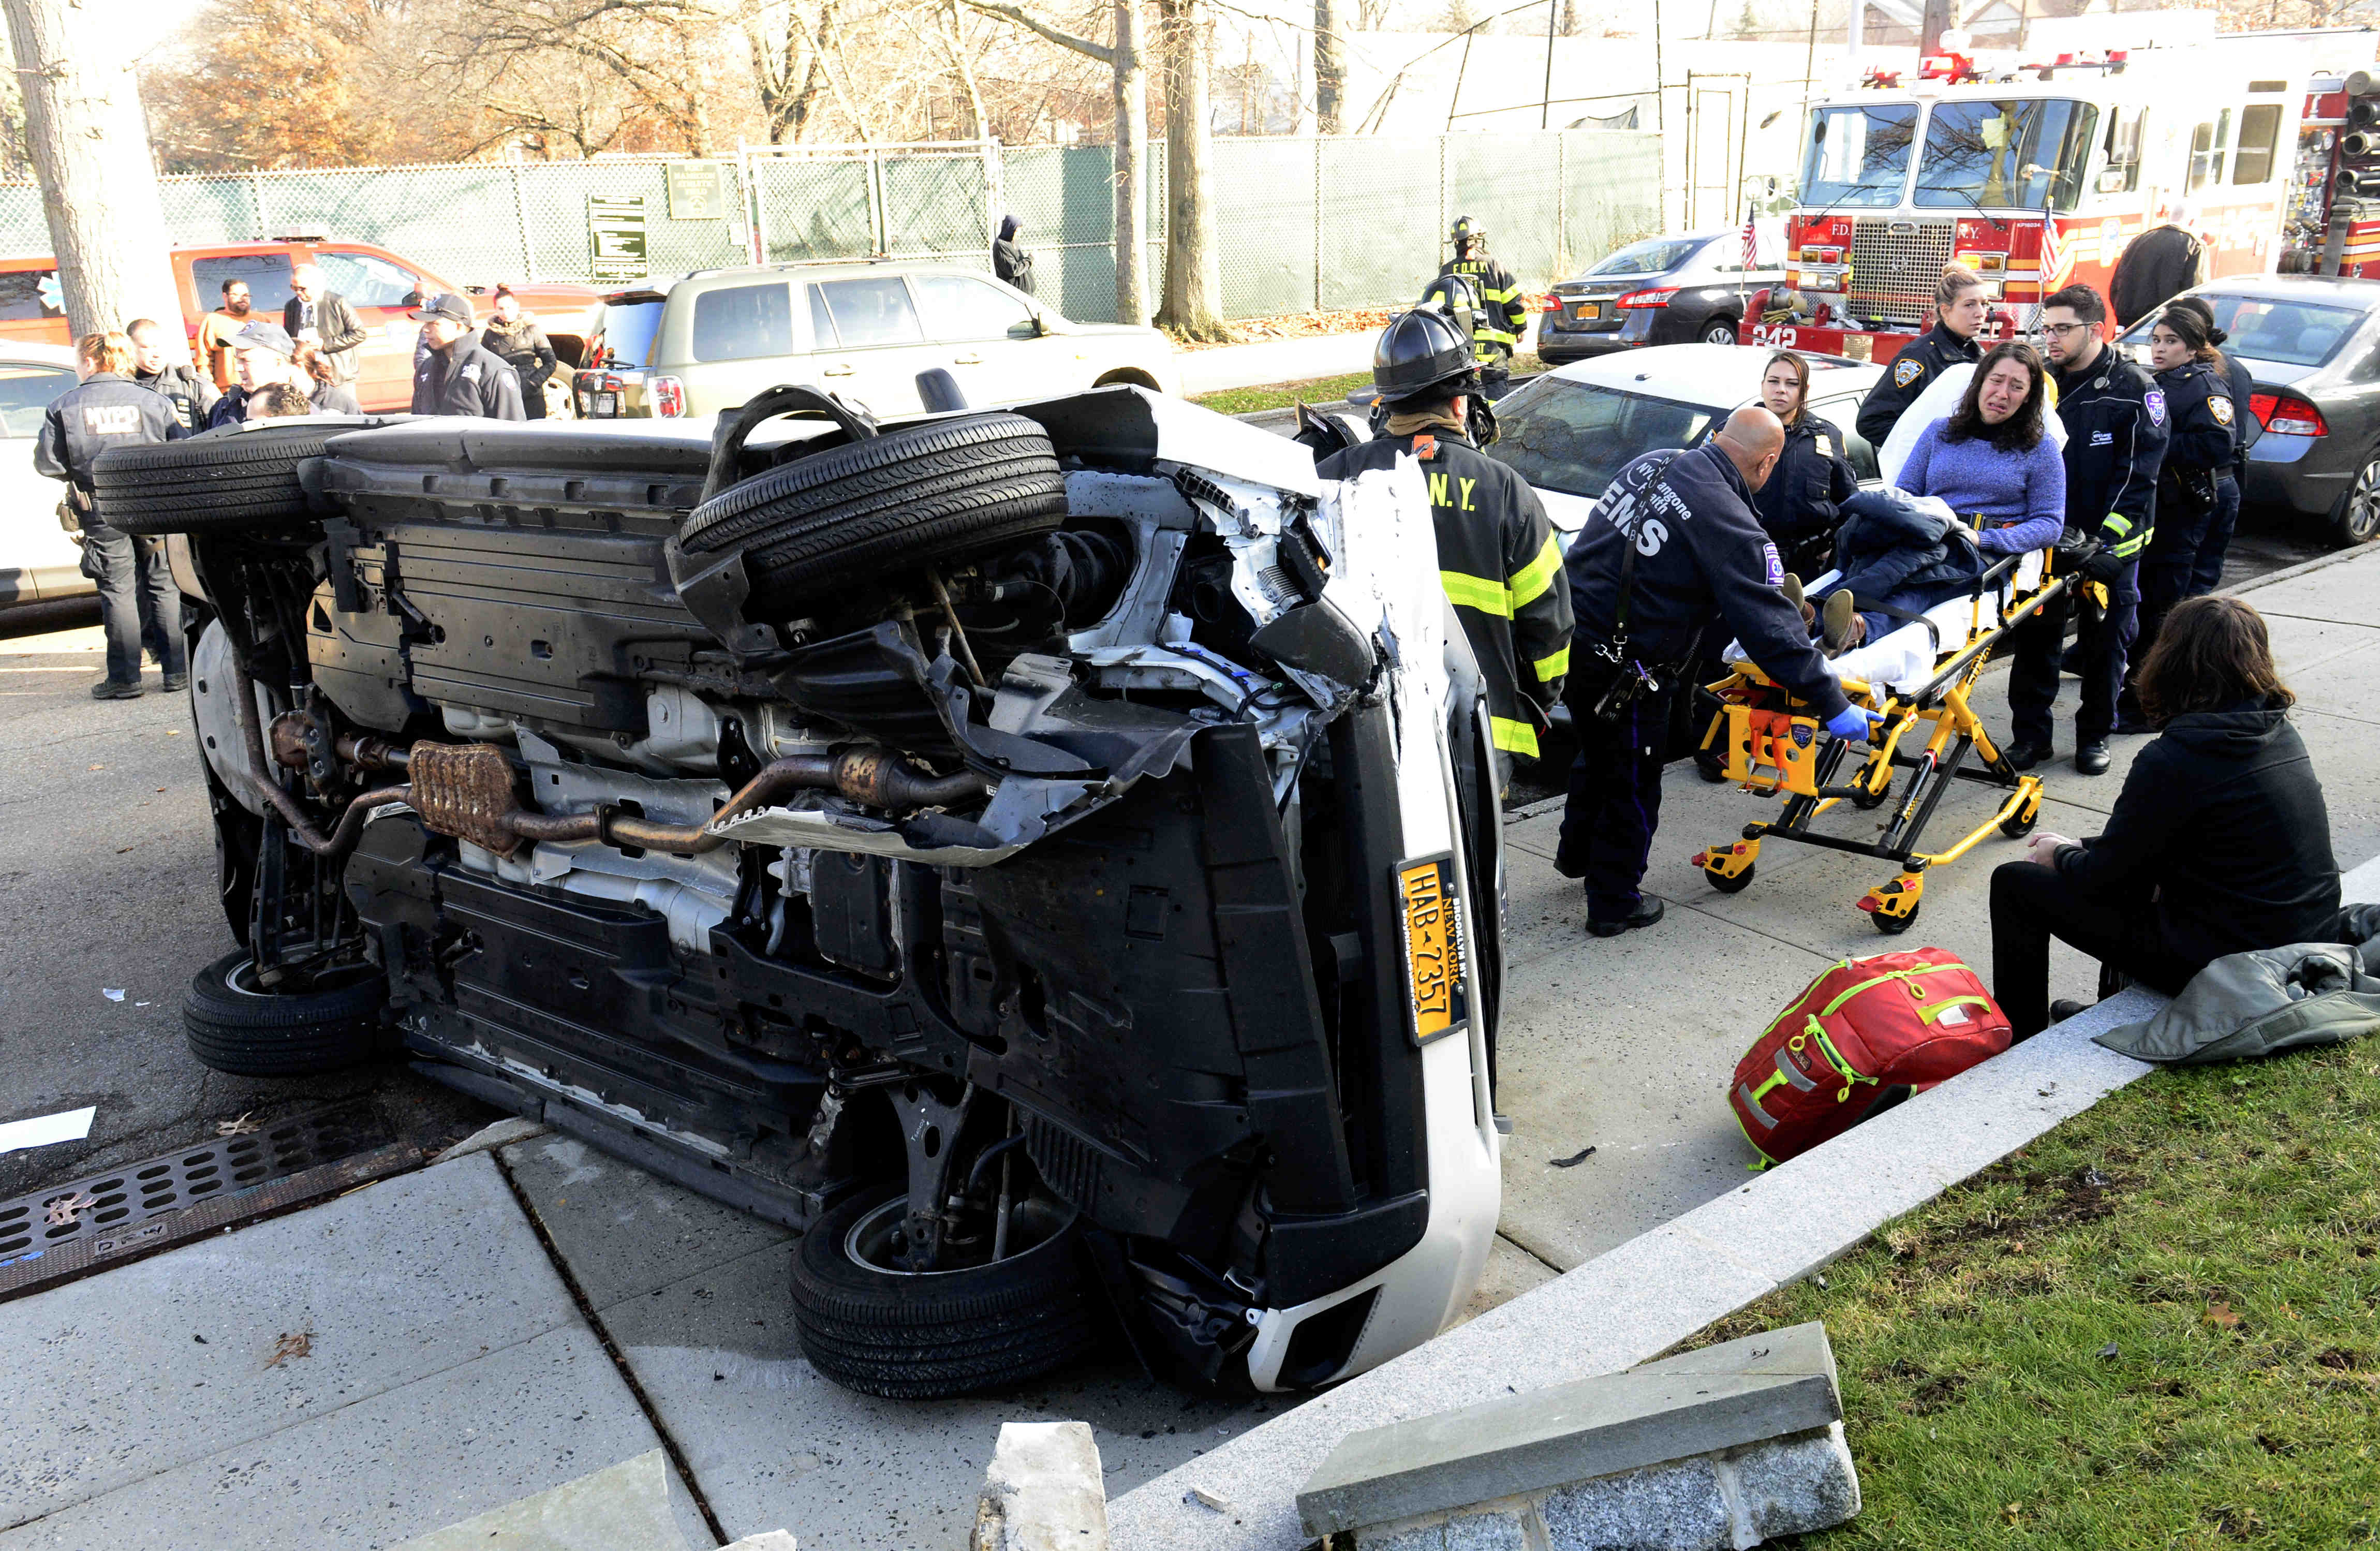 Police and firefighters help the injured victims of the crash on 85th Street next to Fort Hamilton High School Saturday. Eagle photos by Todd Maisel